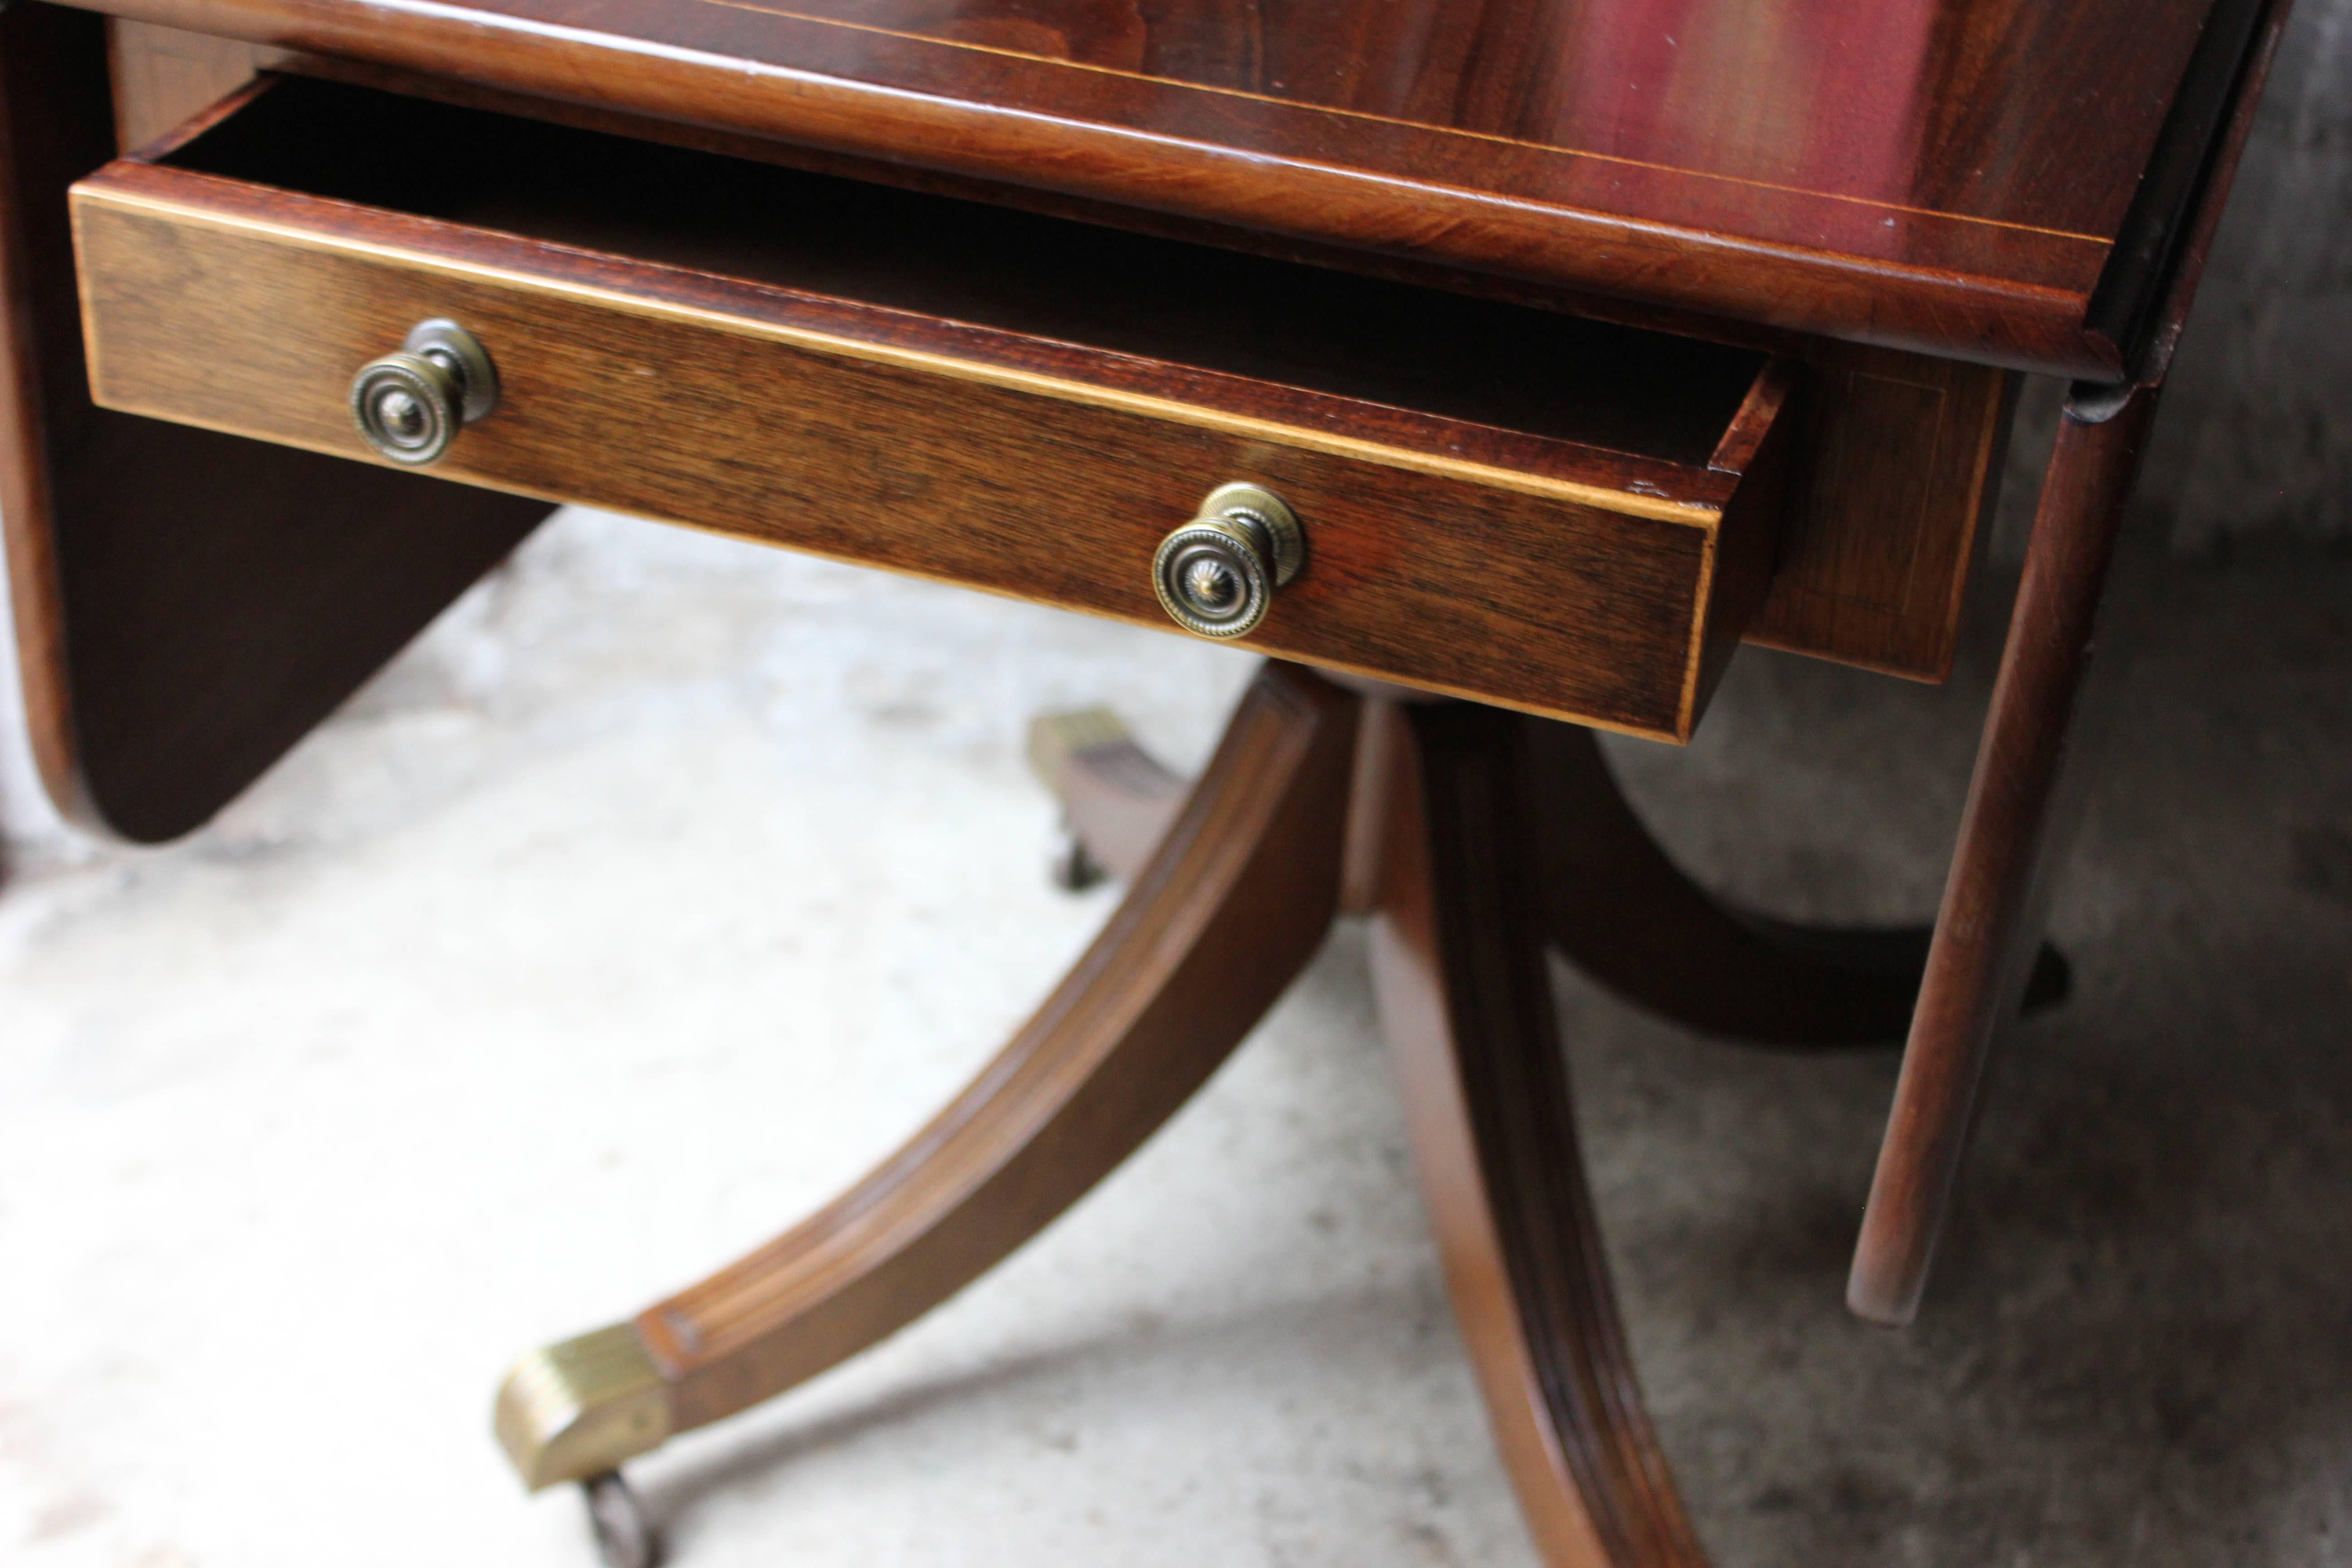 The Classic Regency period boxwood inlaid mahogany pedestal Pembroke table of good colour, having drop leaf sides over a frieze drawer, to a dummy at the opposing end, each being inlaid and with the original brass knob handles, the top raised on a